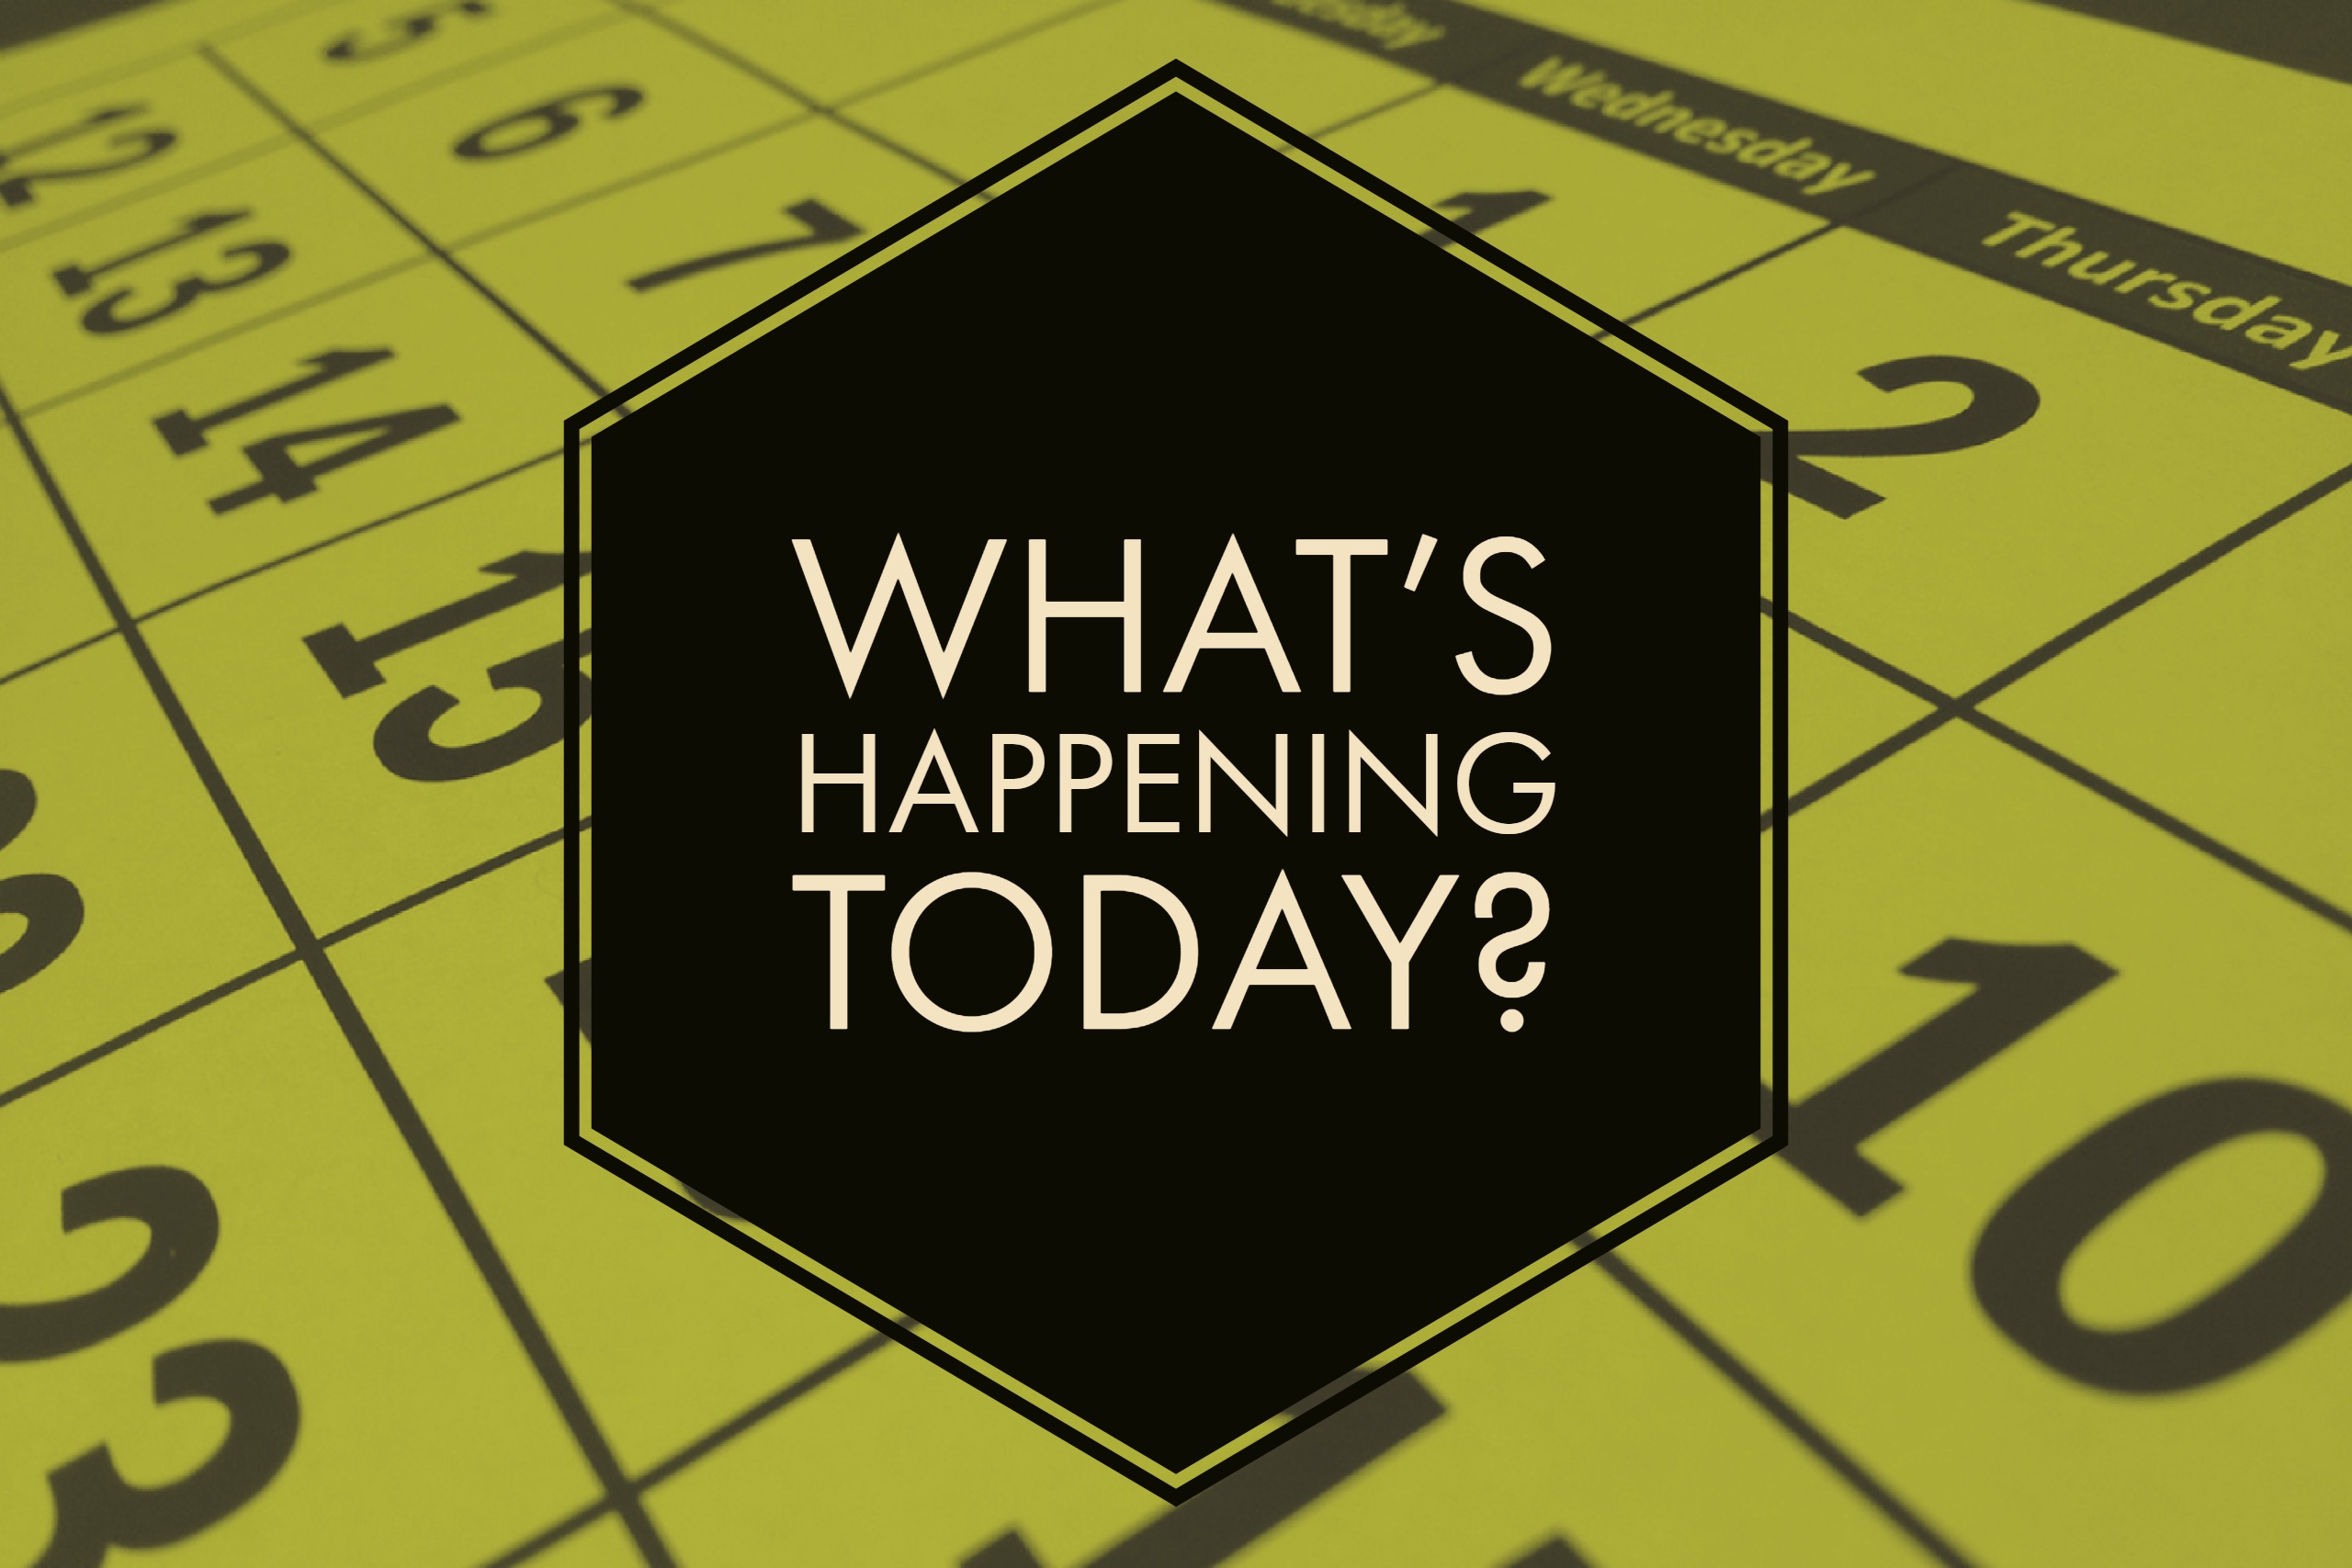 what's happening today text image